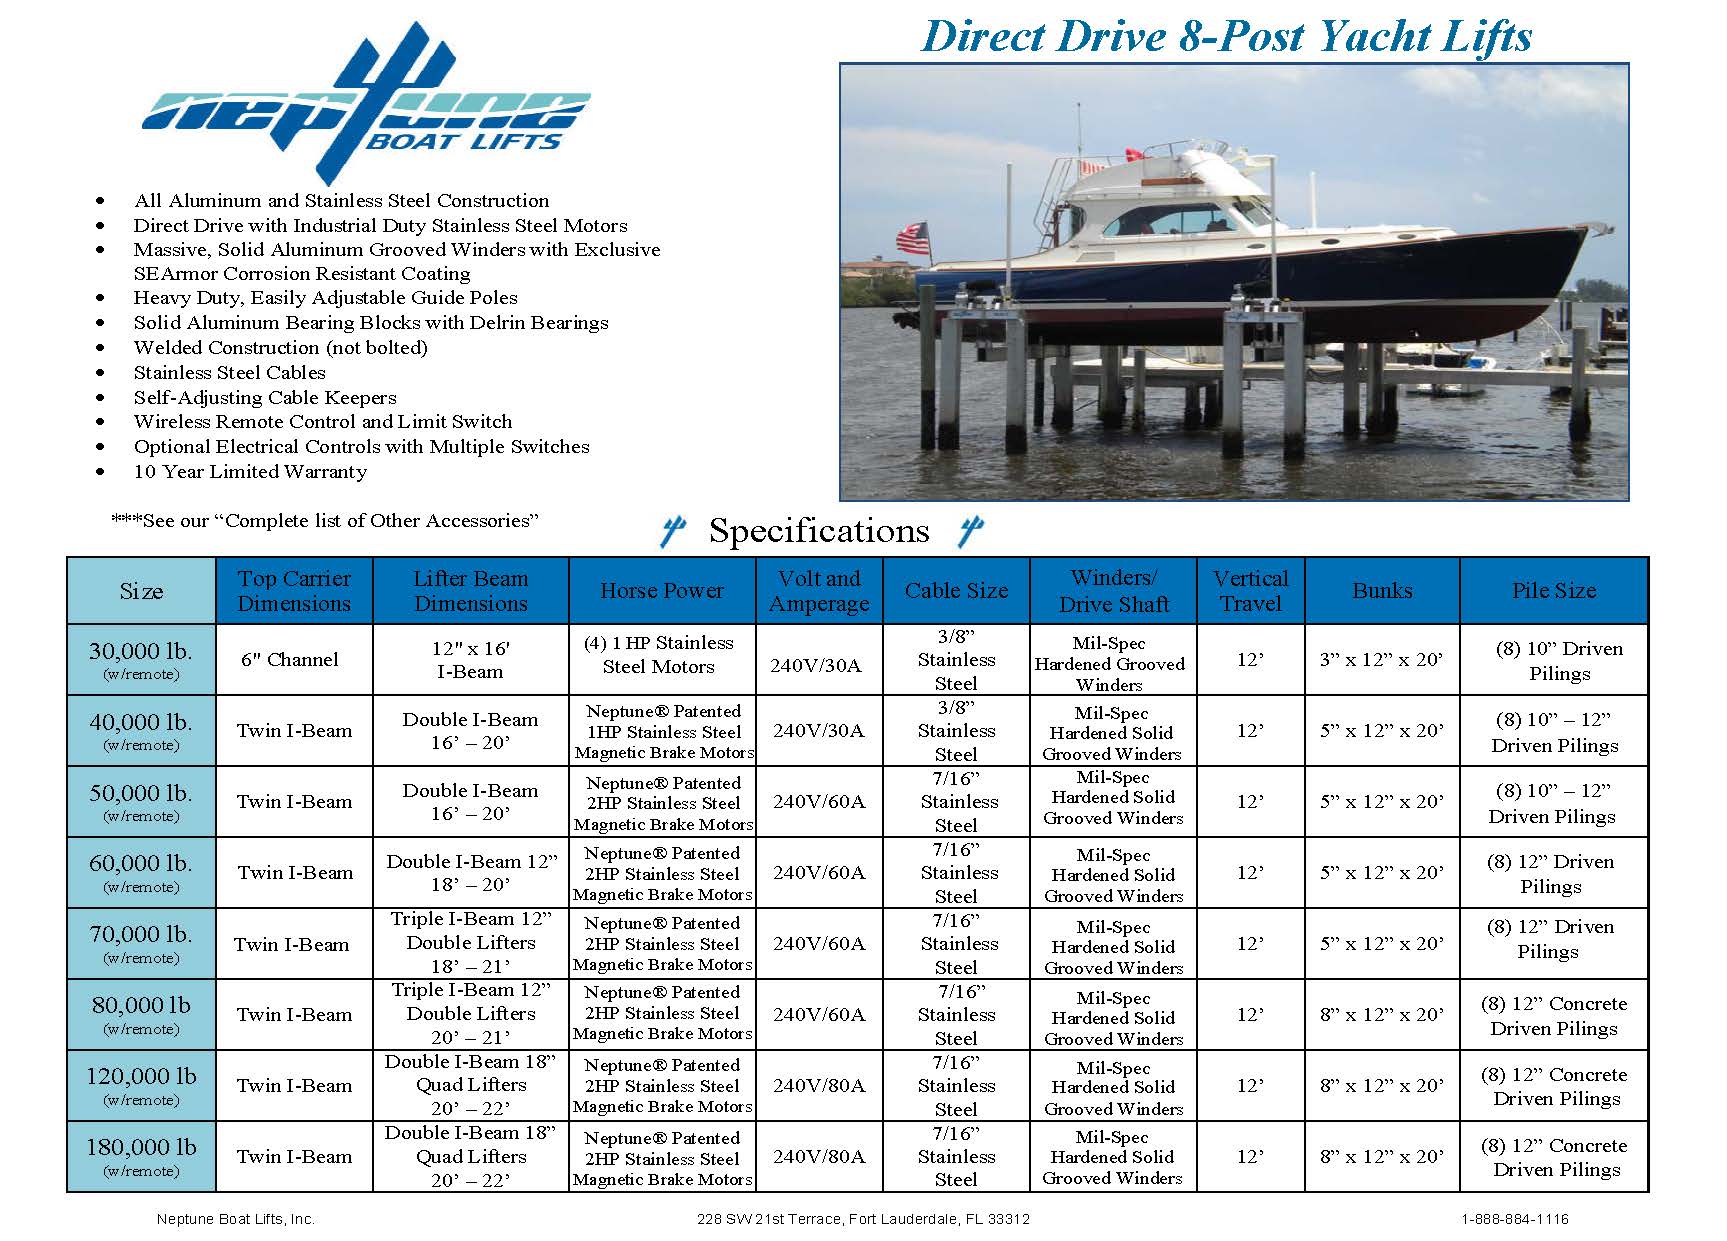 direct drive eight post yach lift specification chart